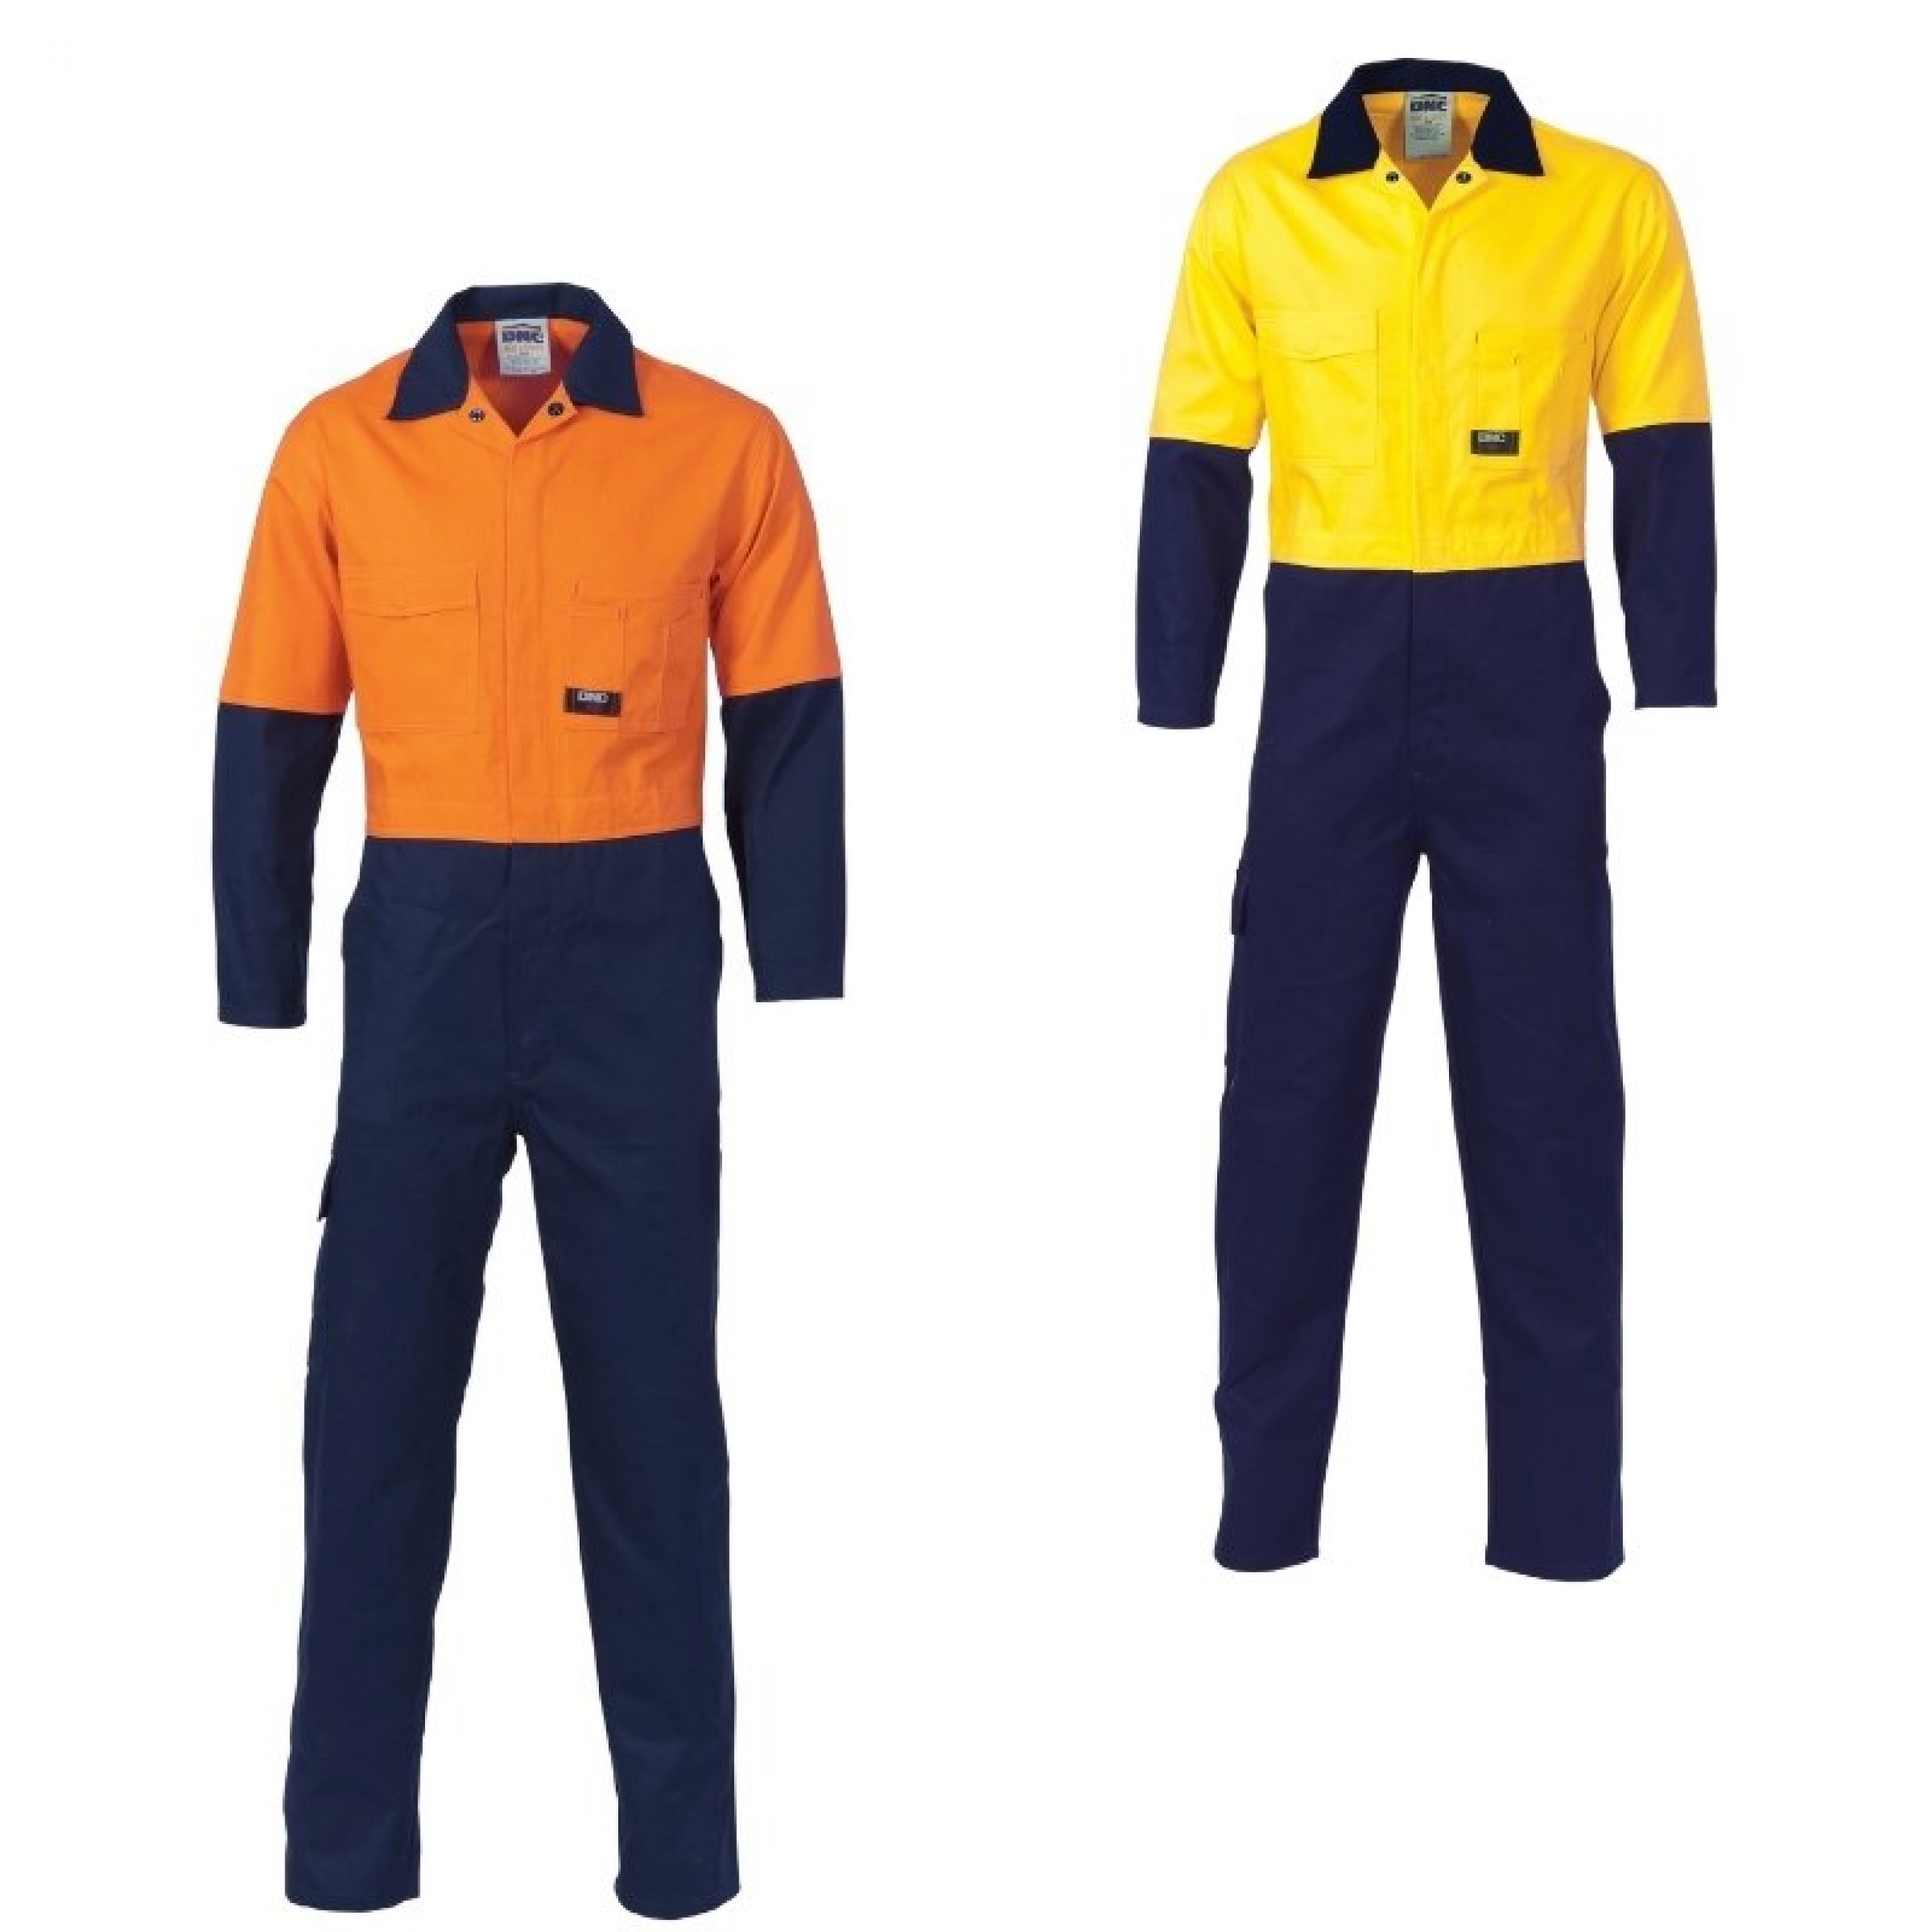 DNC HIVIS COOL BREEZE LIGHT WEIGHT COTTON DRILL COVERALL 190GSM 3852 2 TONE